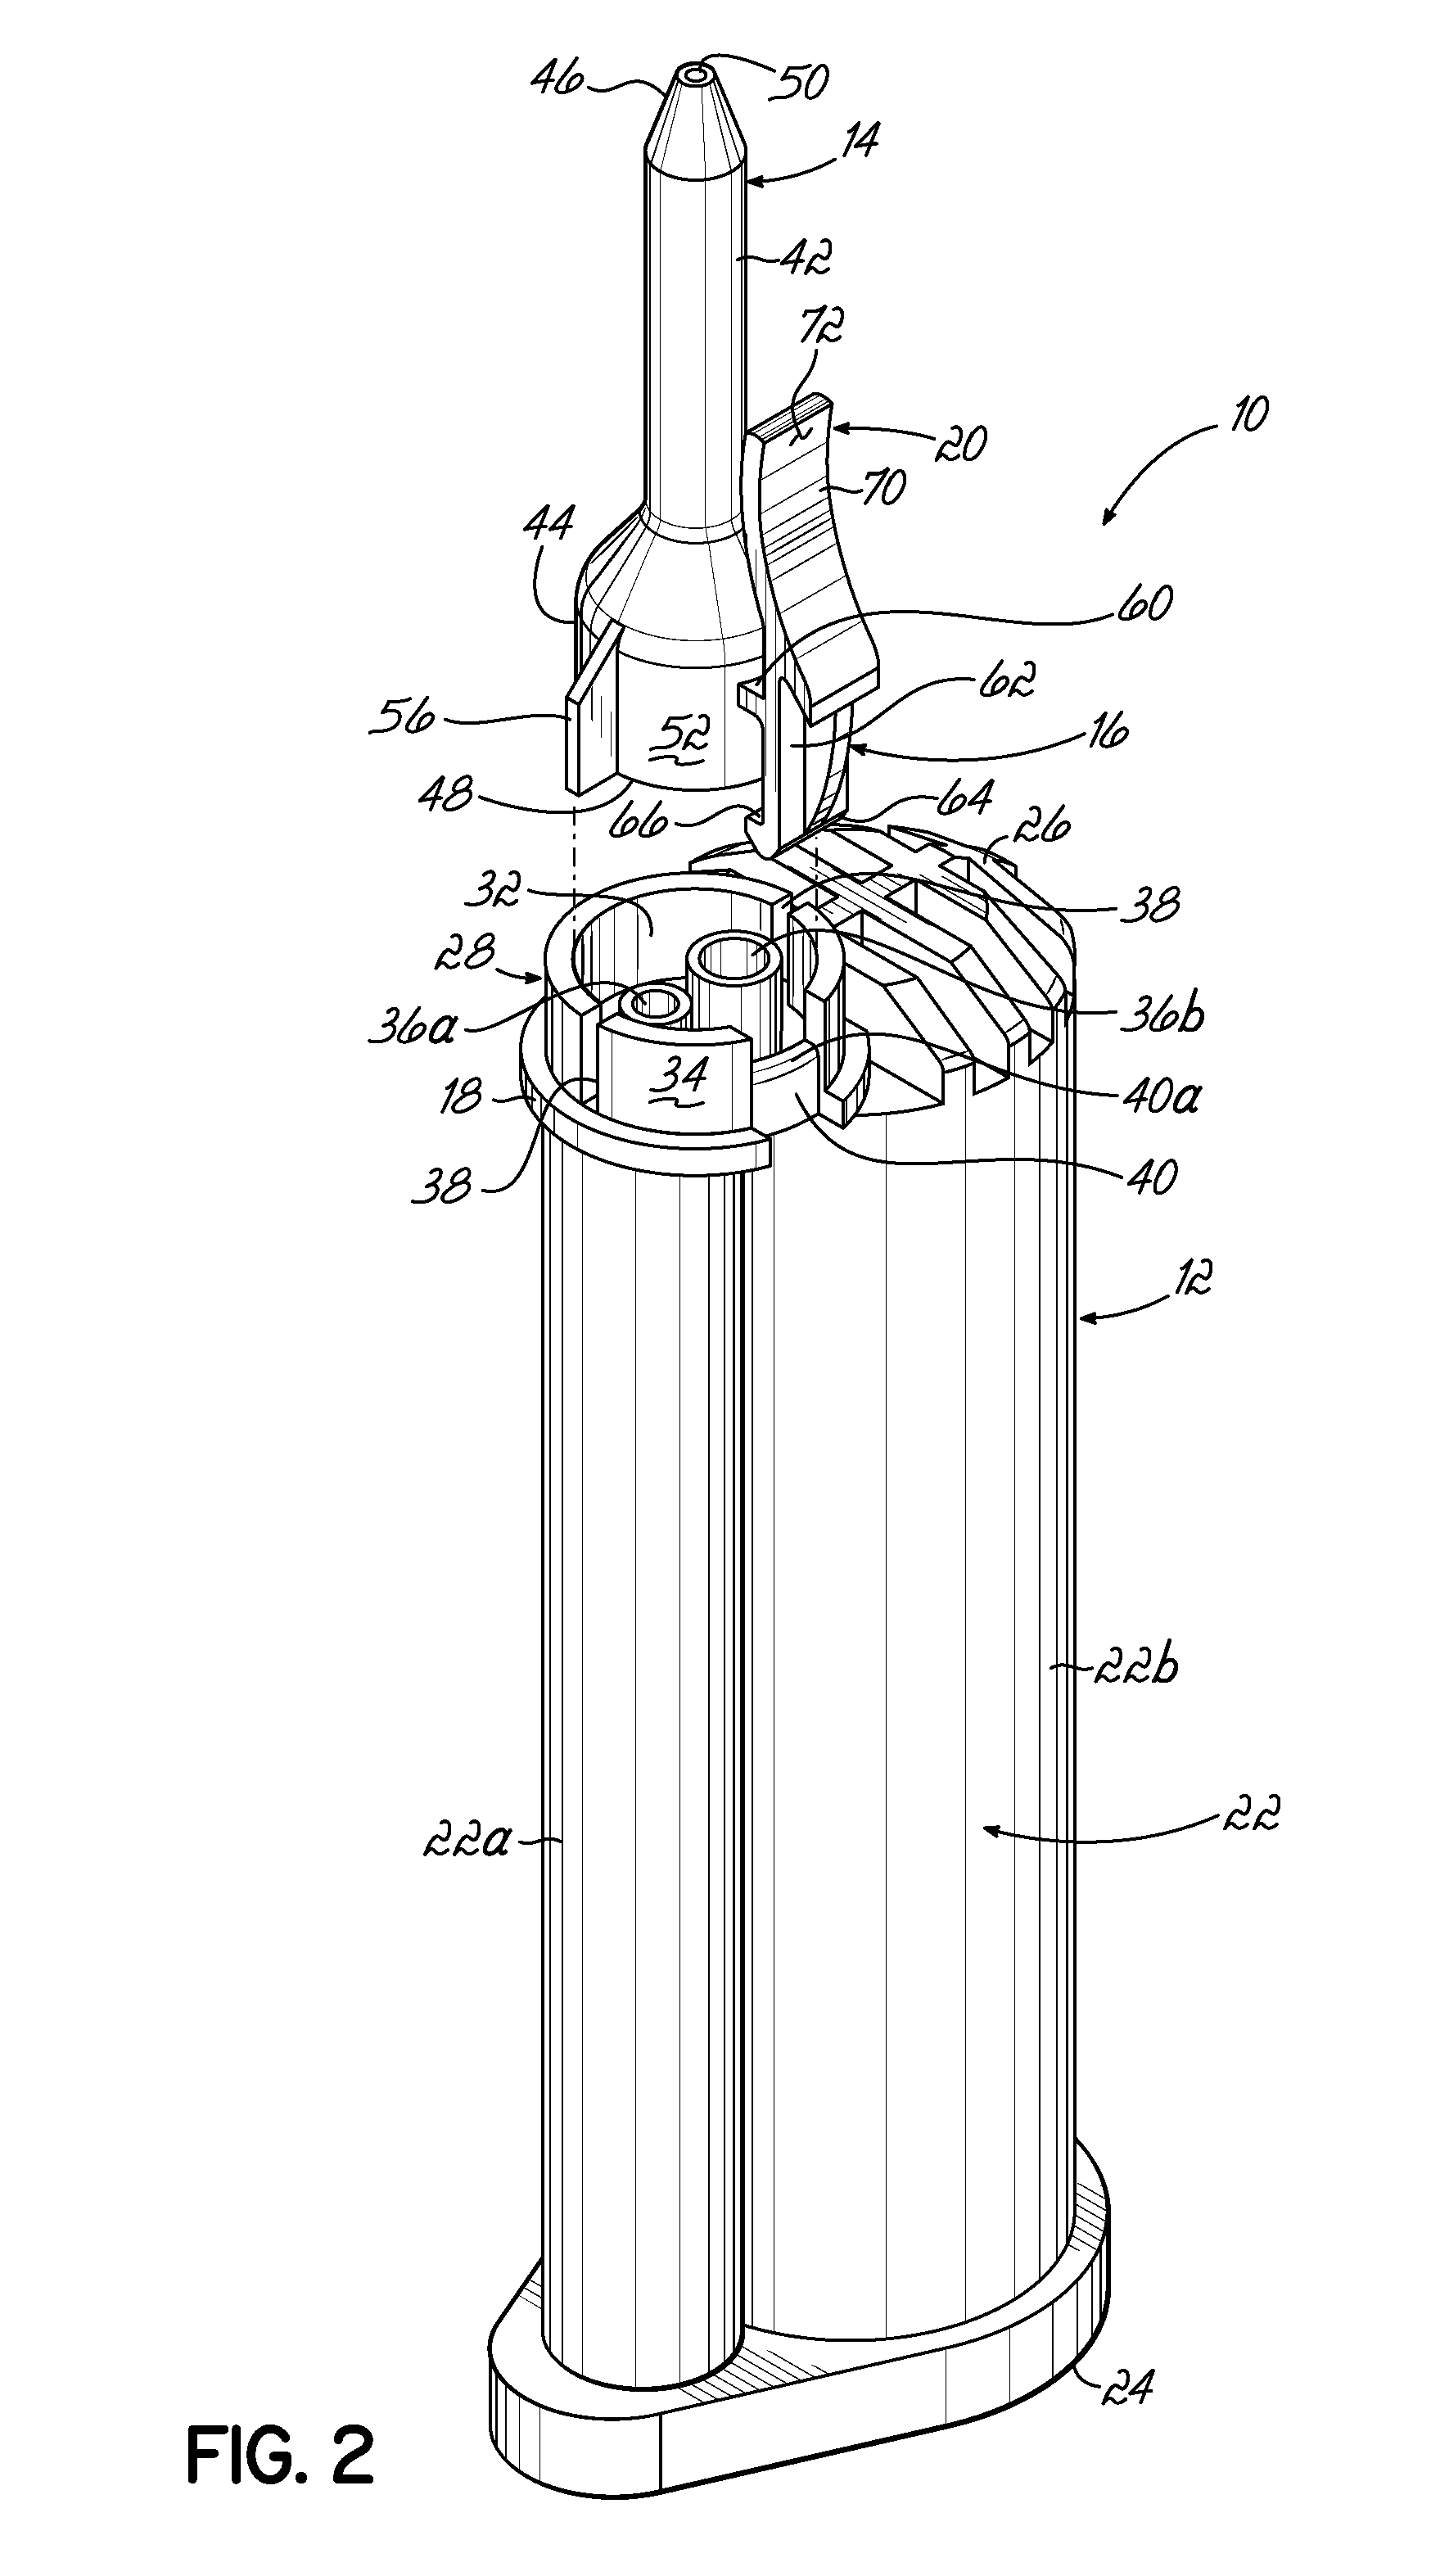 Dispensing assembly and method using snap engagement of a mixer and a cartridge